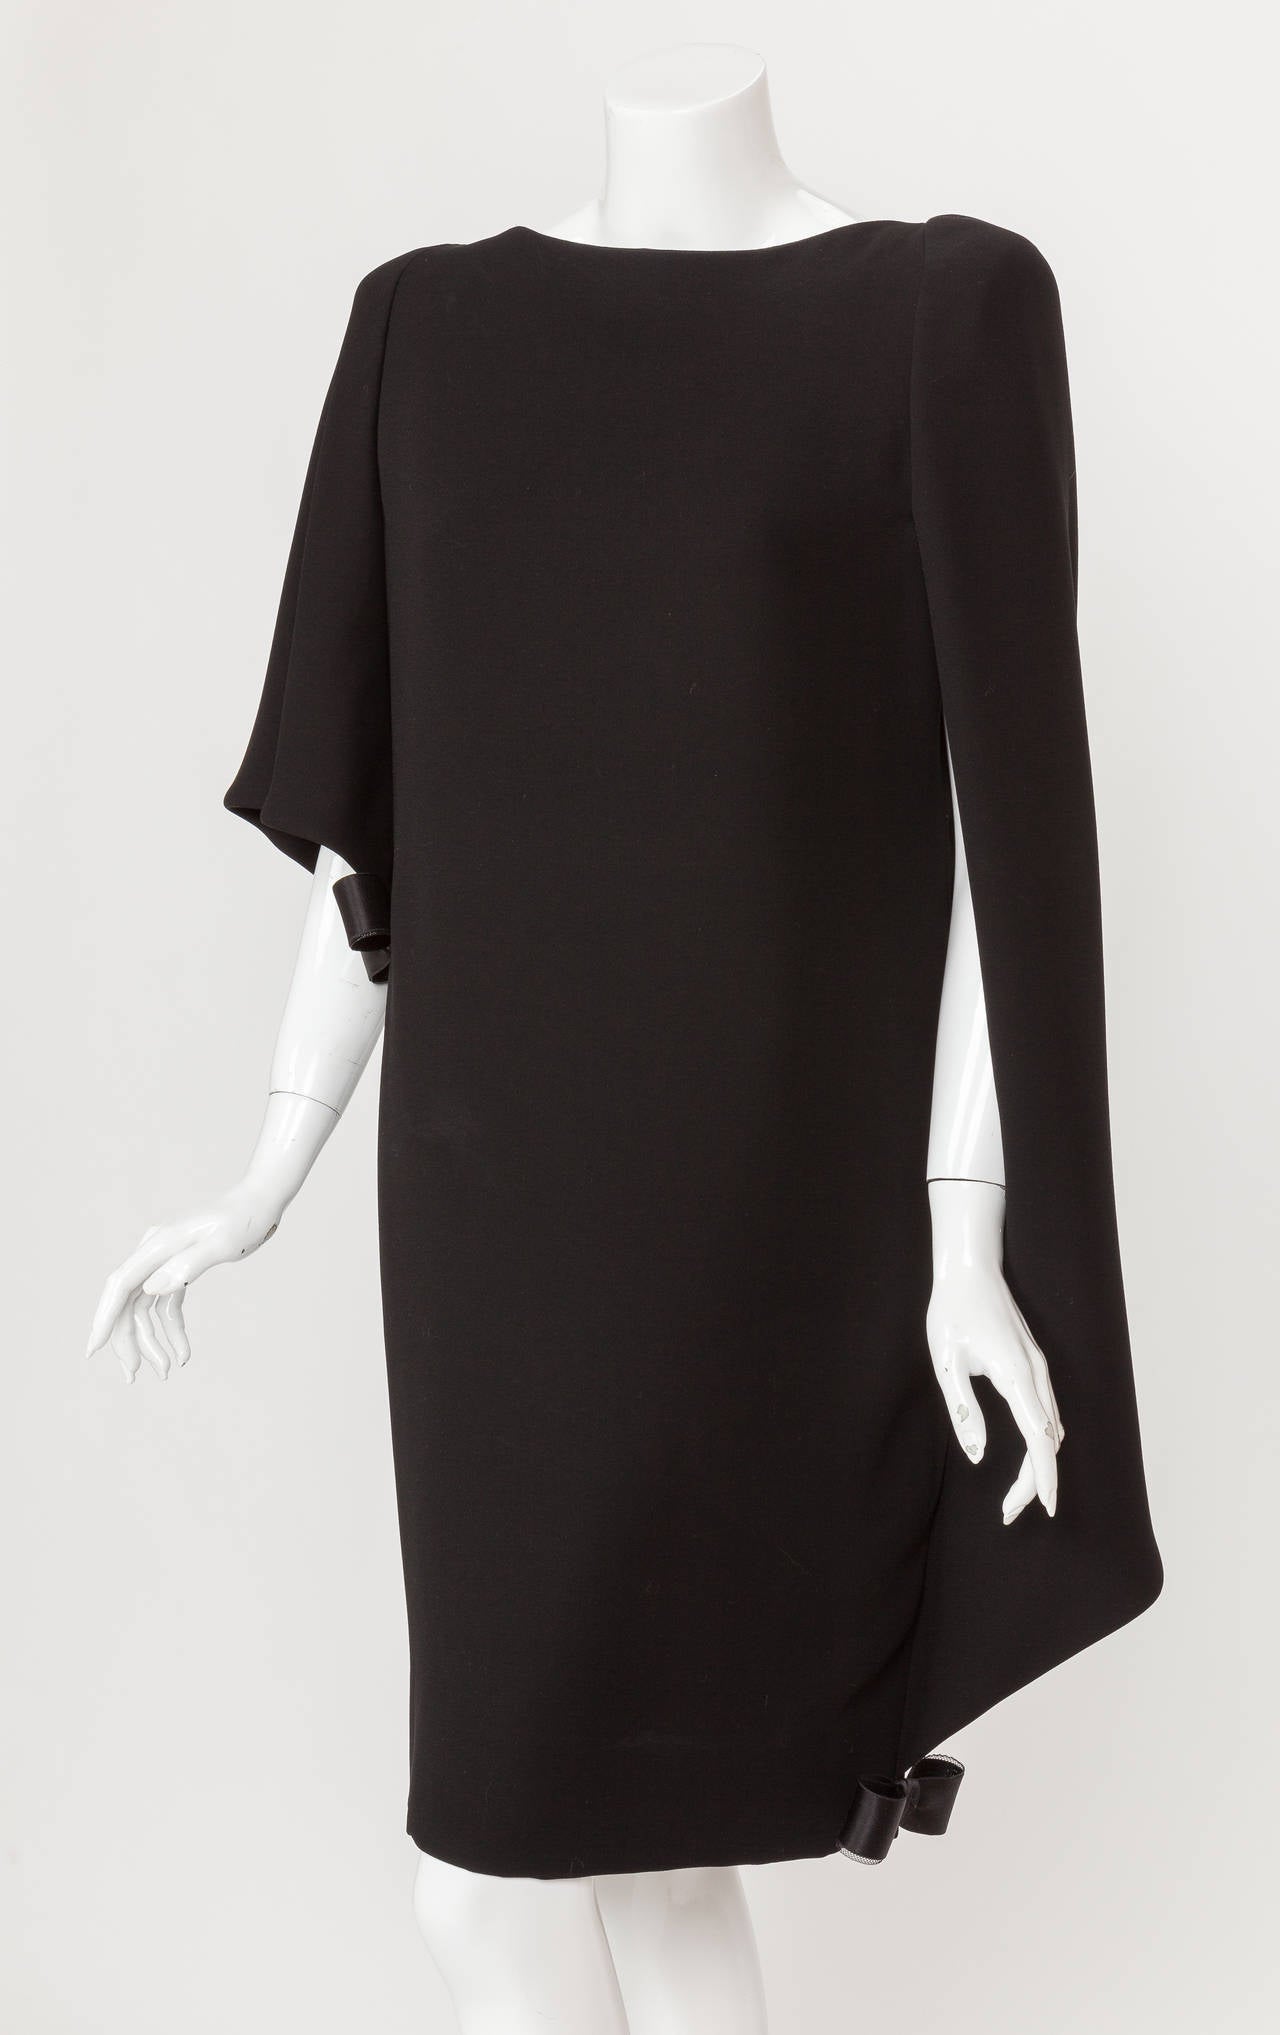 A circa 1992 Pierre Cardin haute couture black silk asymmetric cocktail dress with attached cape. This is absolutely one of the most beautiful garments I've ever seen and it is a masterclass in exquisite haute couture tailoring technique. The